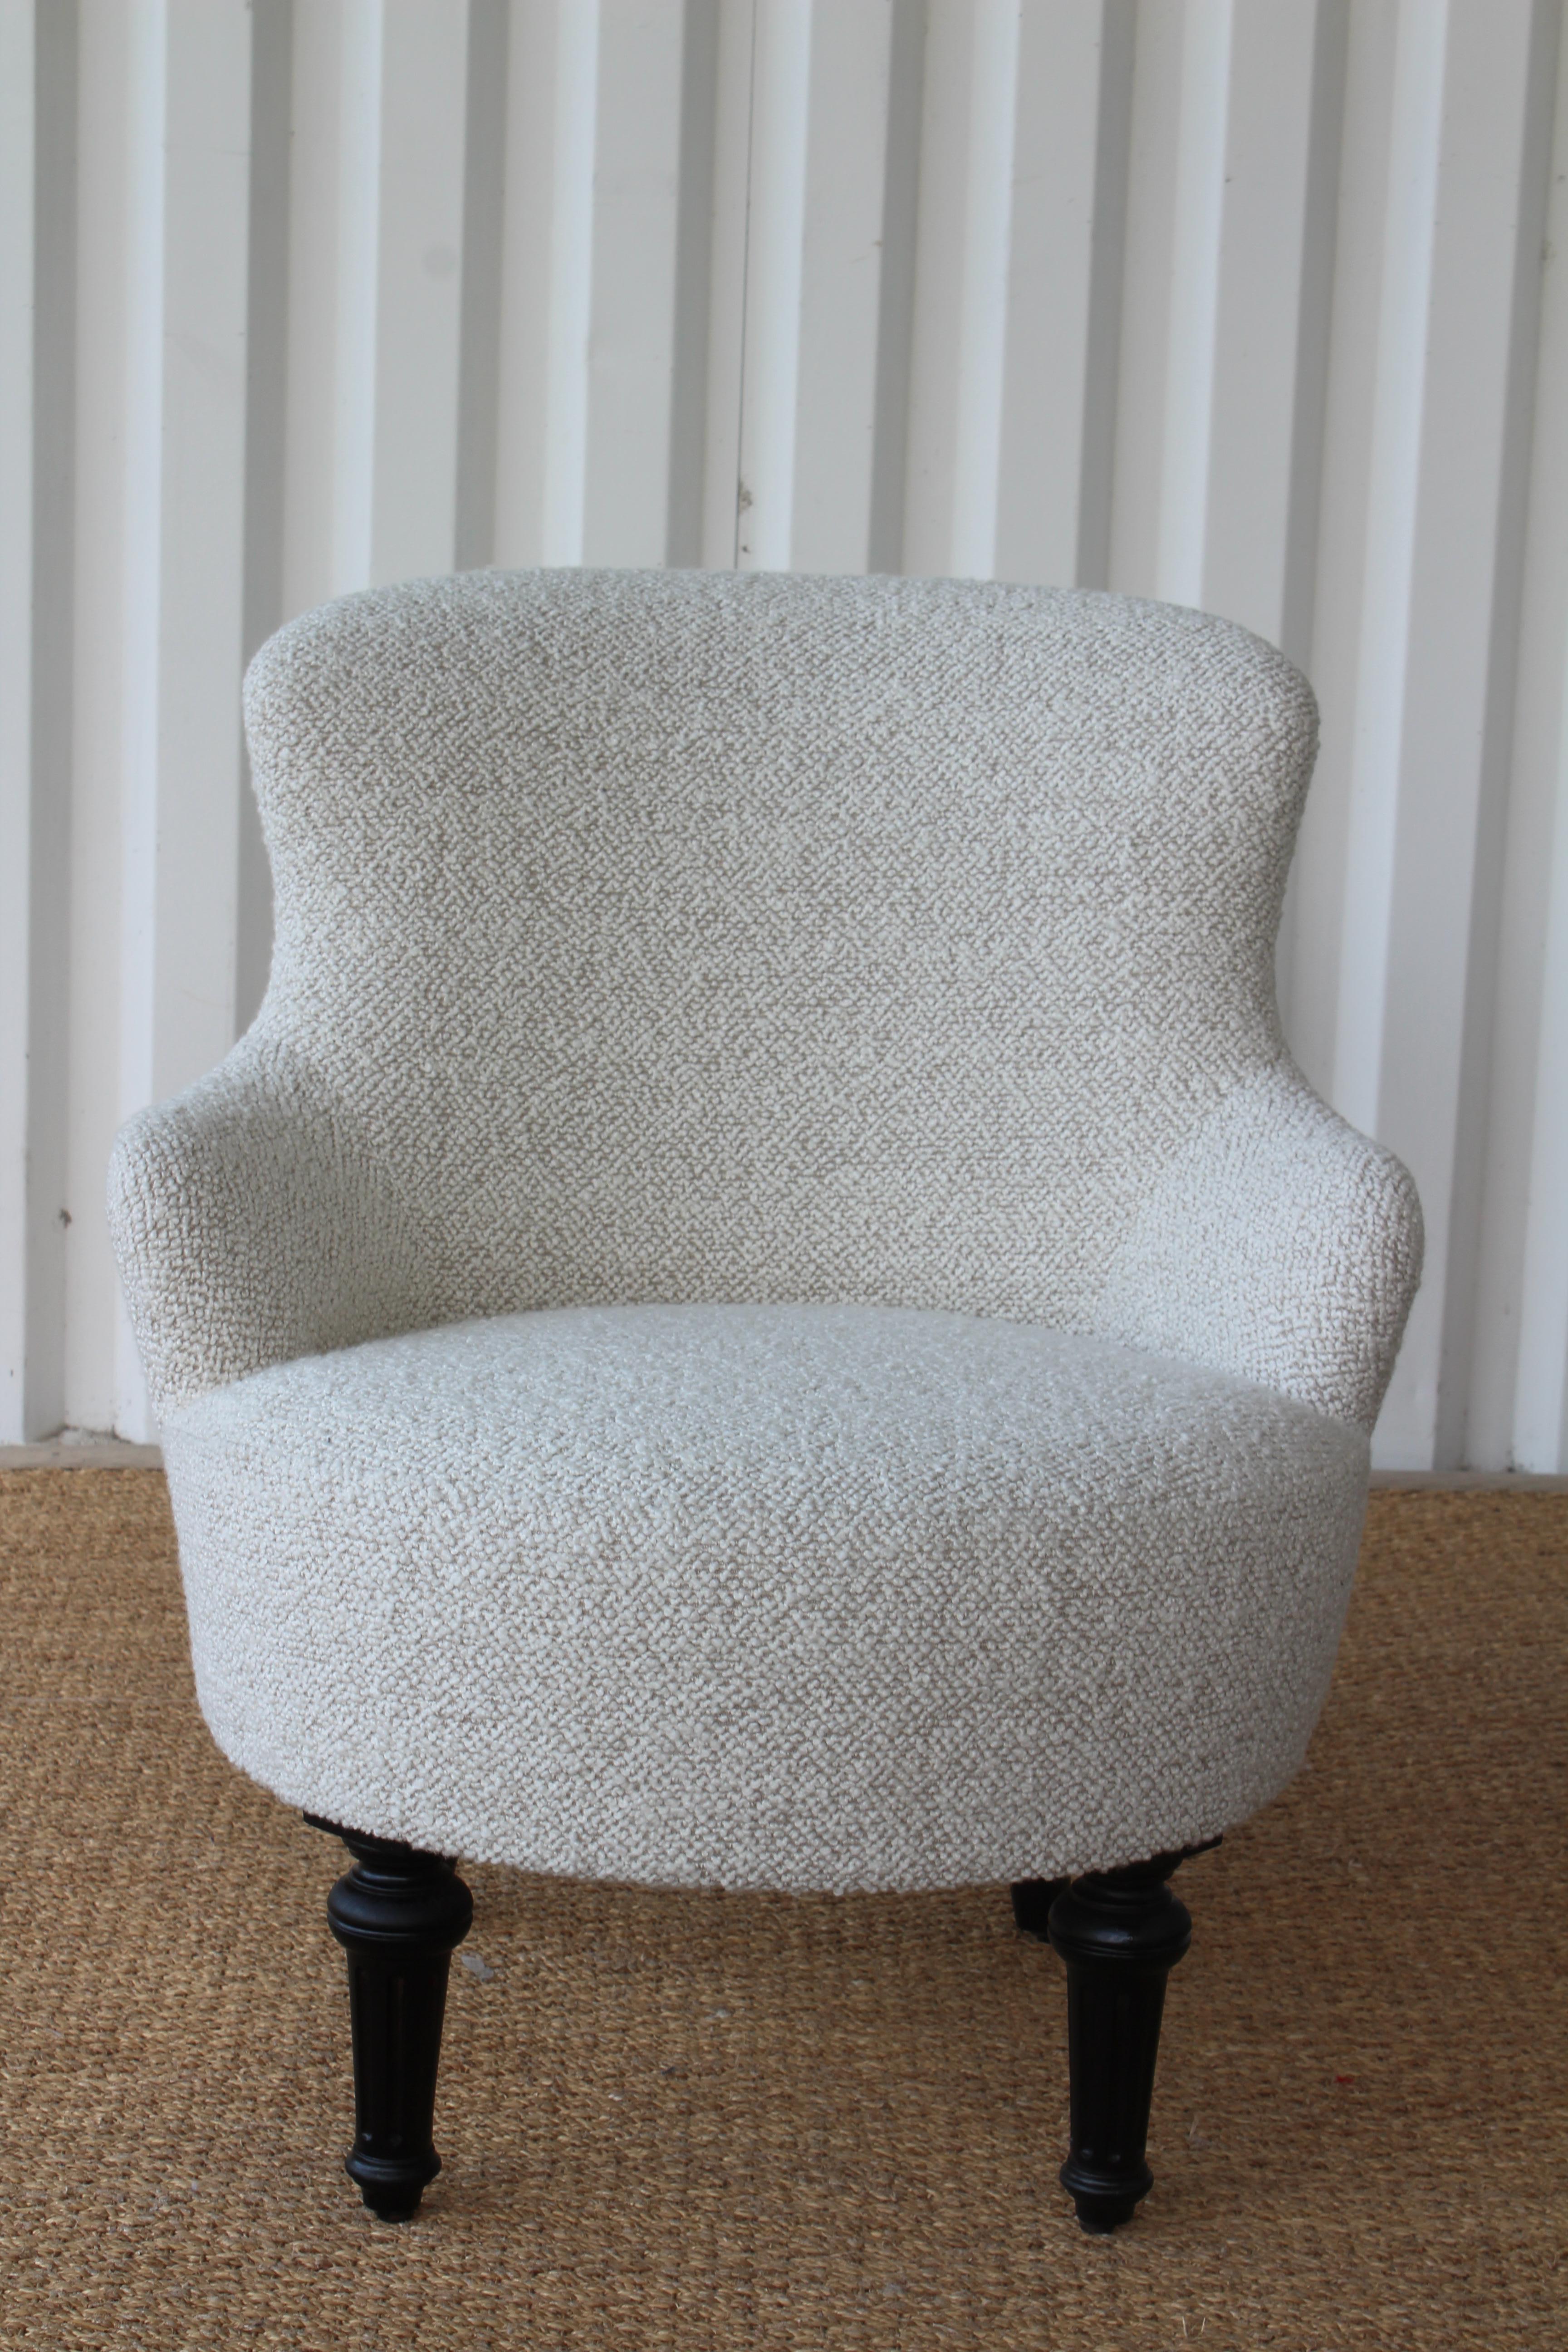 Vintage French boudoir chair. Reupholstered in a nubby wool blend bouclé. The walnut legs have been refinished satin black. In excellent condition.